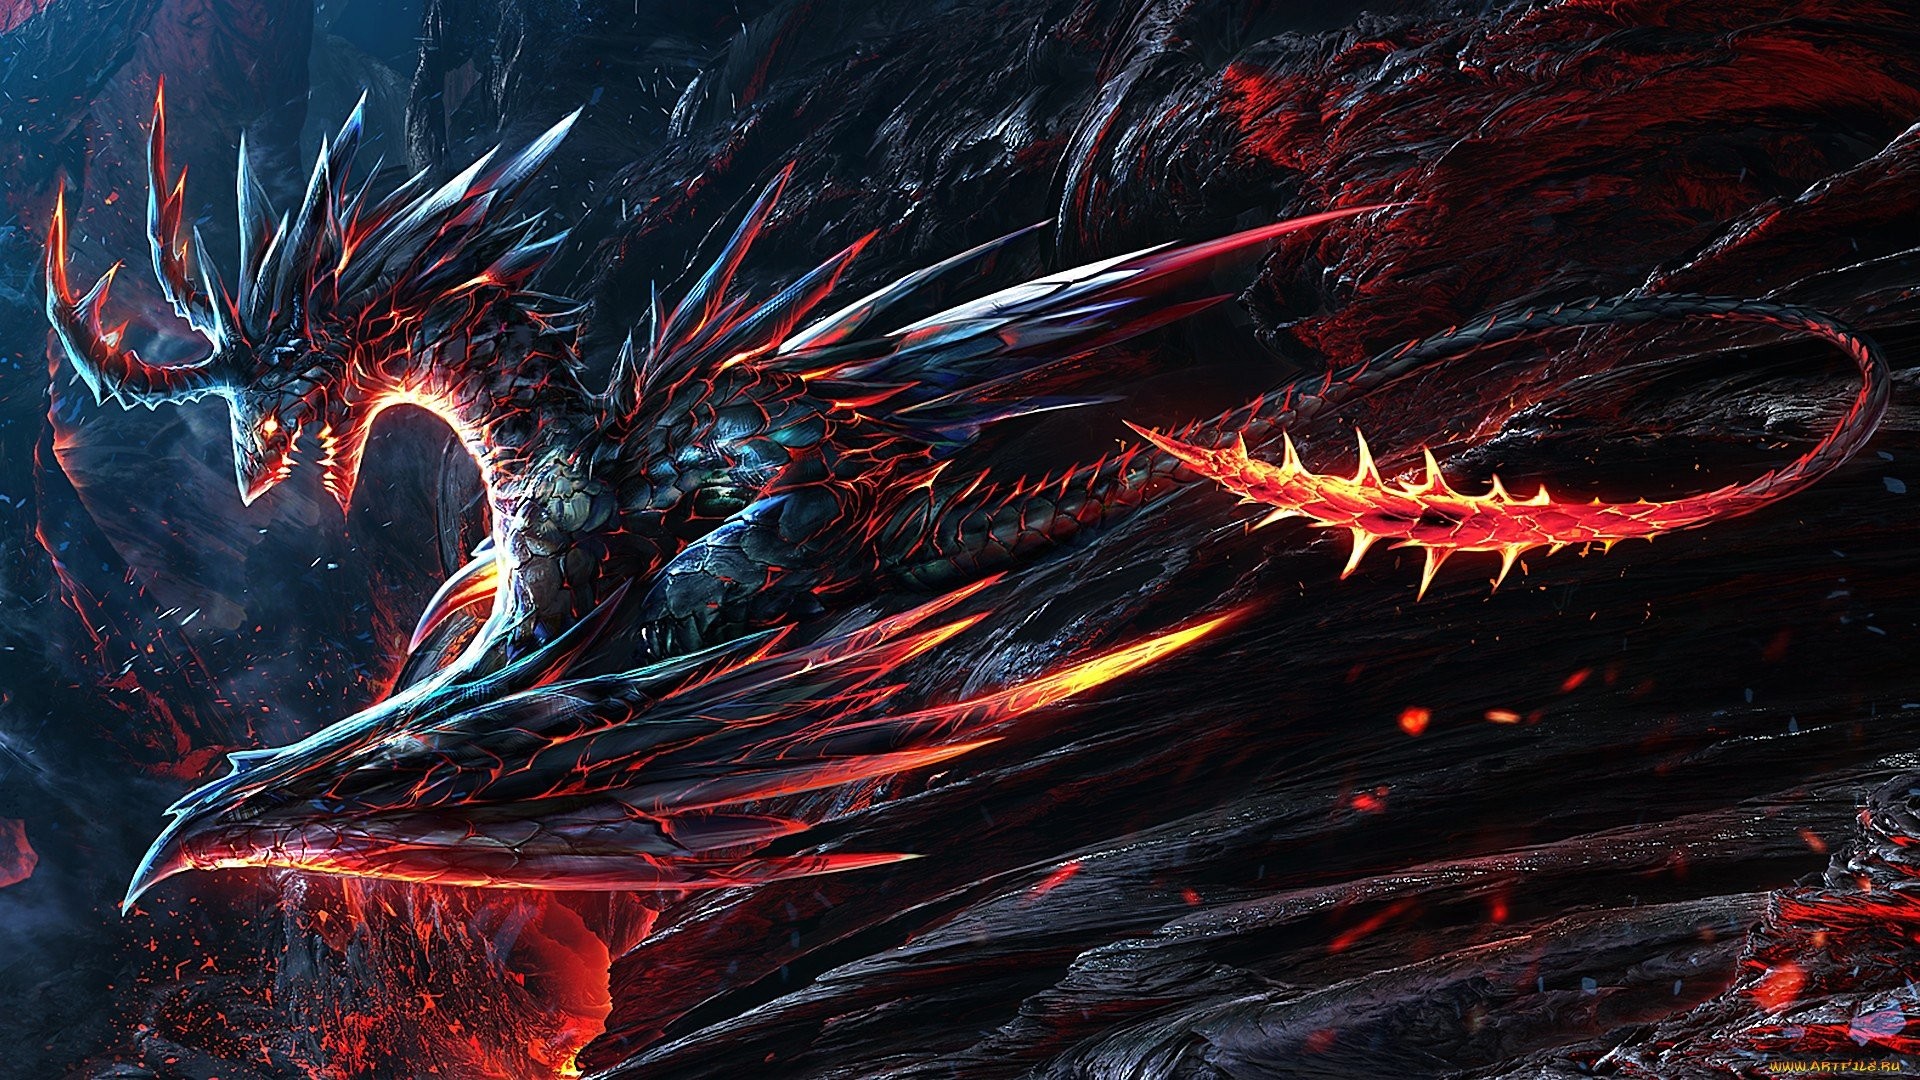 Lava Dragon Wallpapers Lava Dragon Wallpapers Pinterest Lava and Dragons